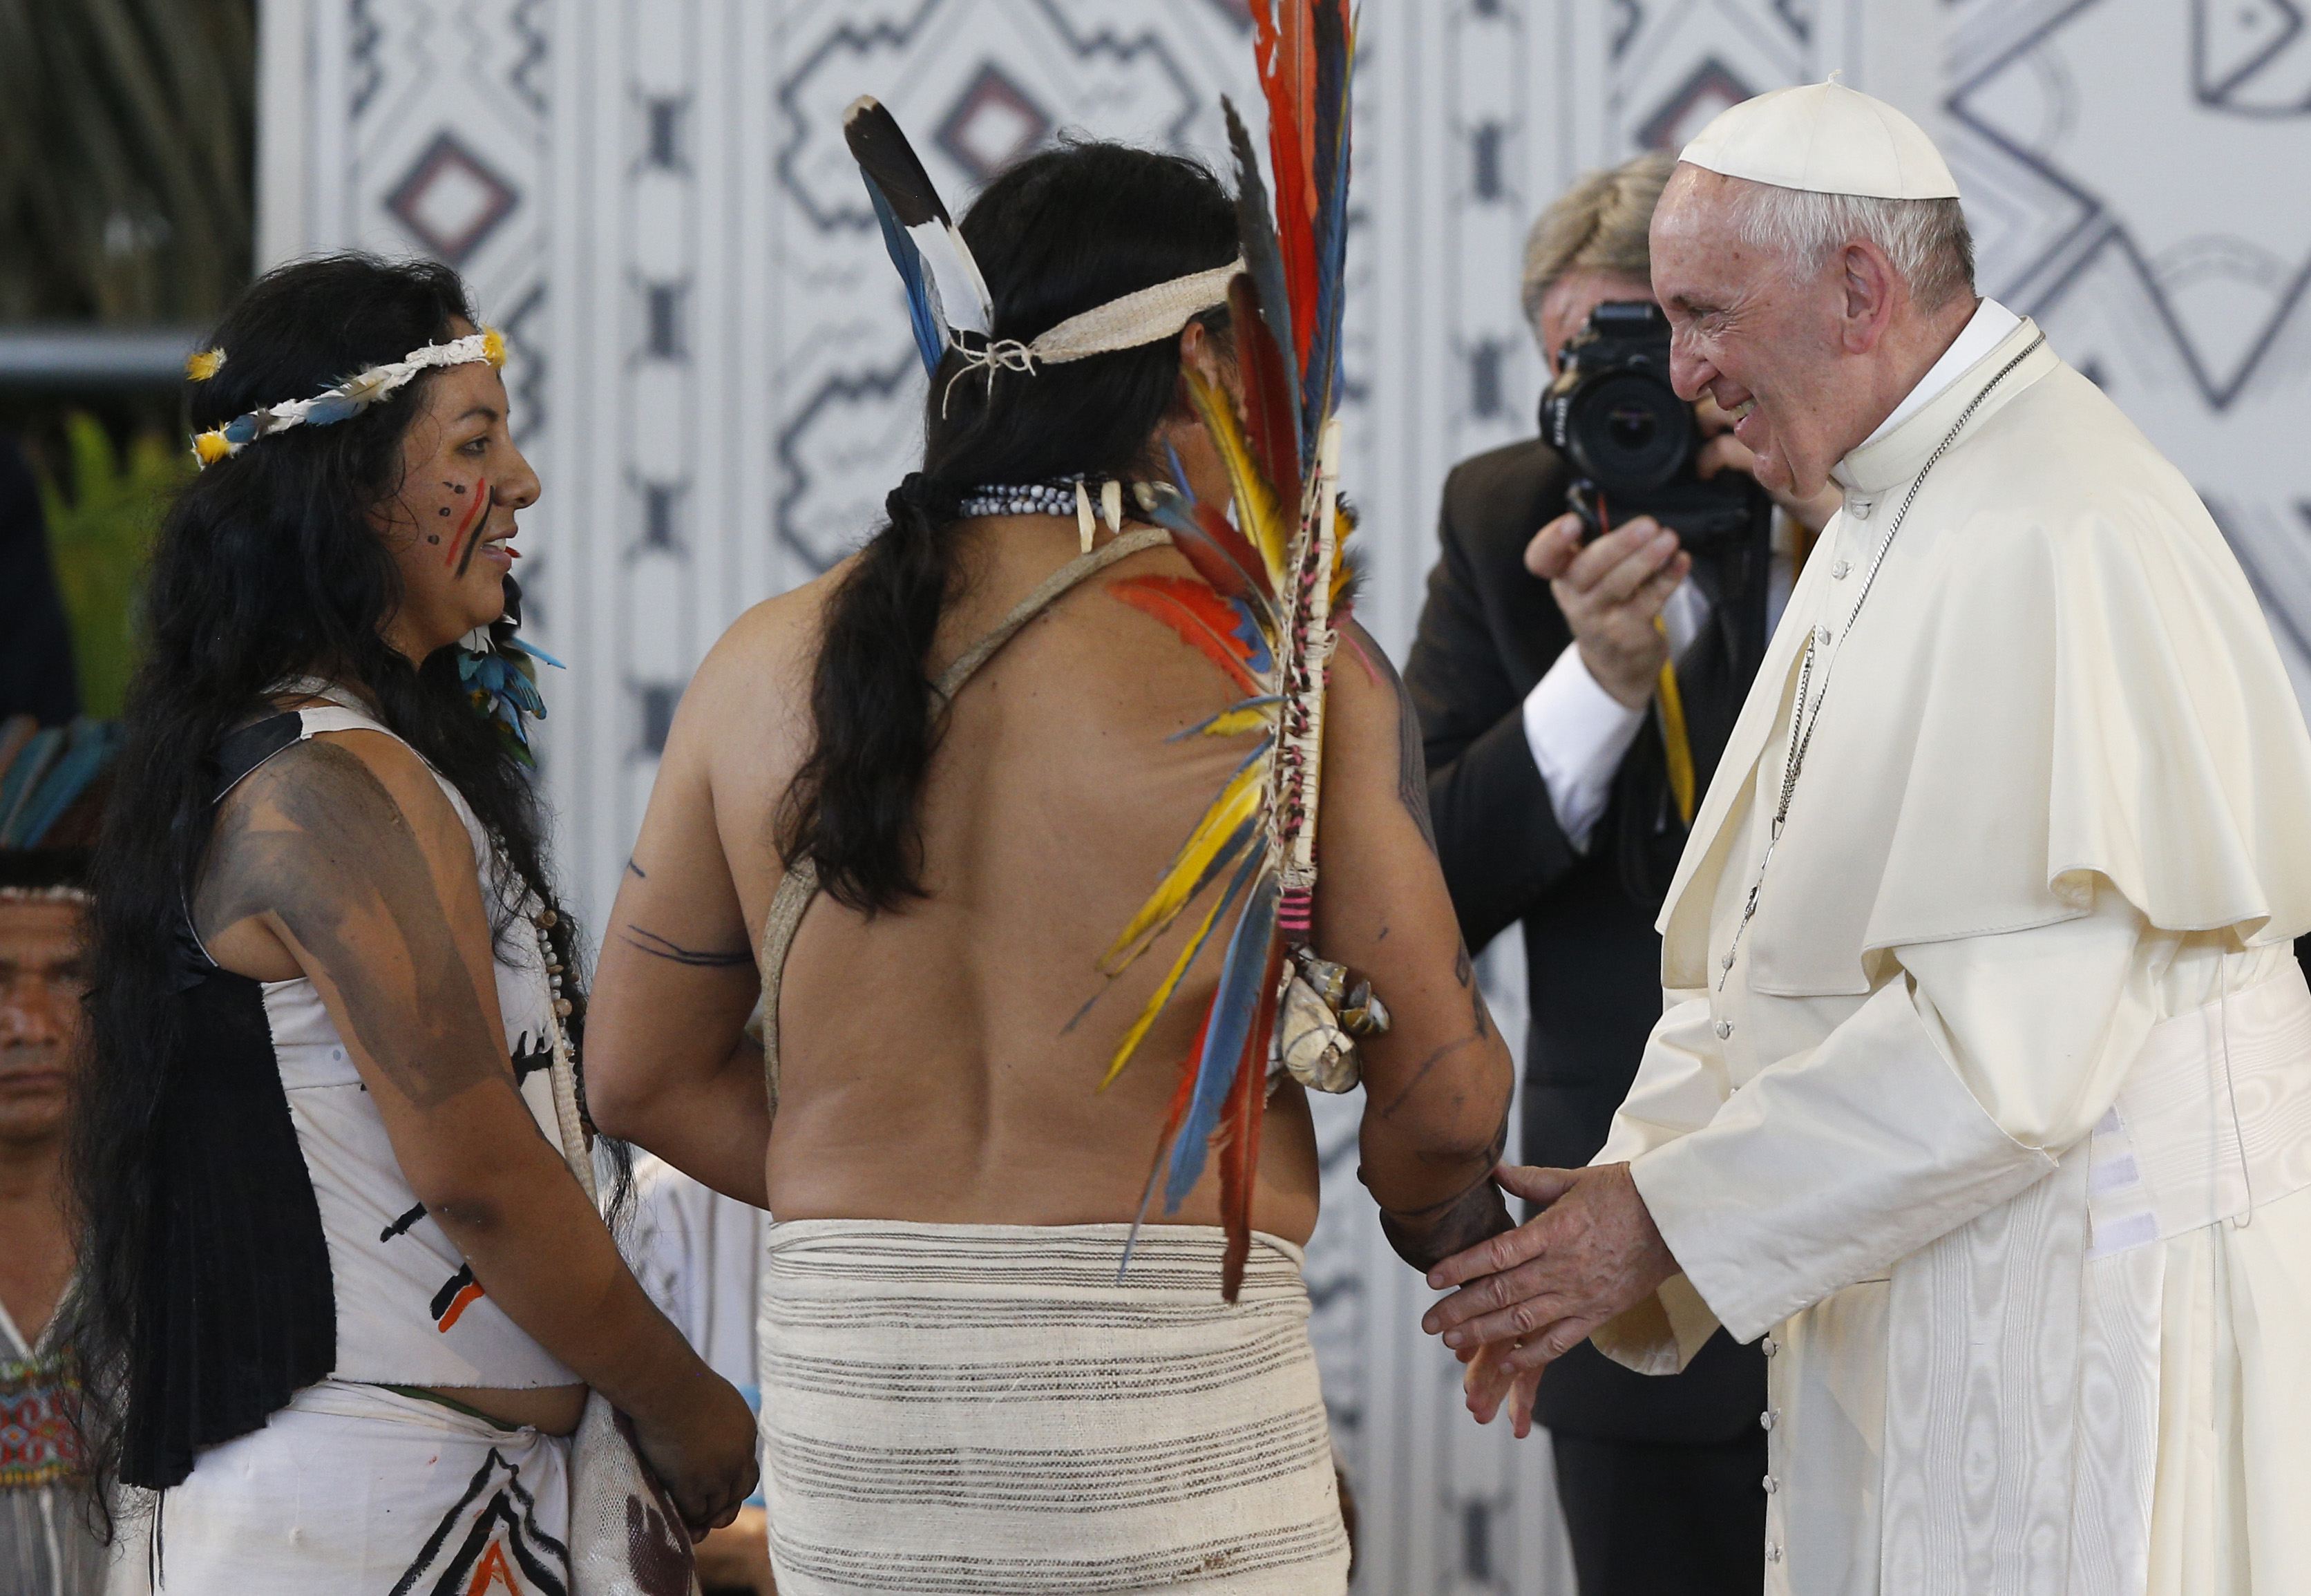 Brazilian Bishops' conference insists upcoming Pan Amazonia synod is internal church matter